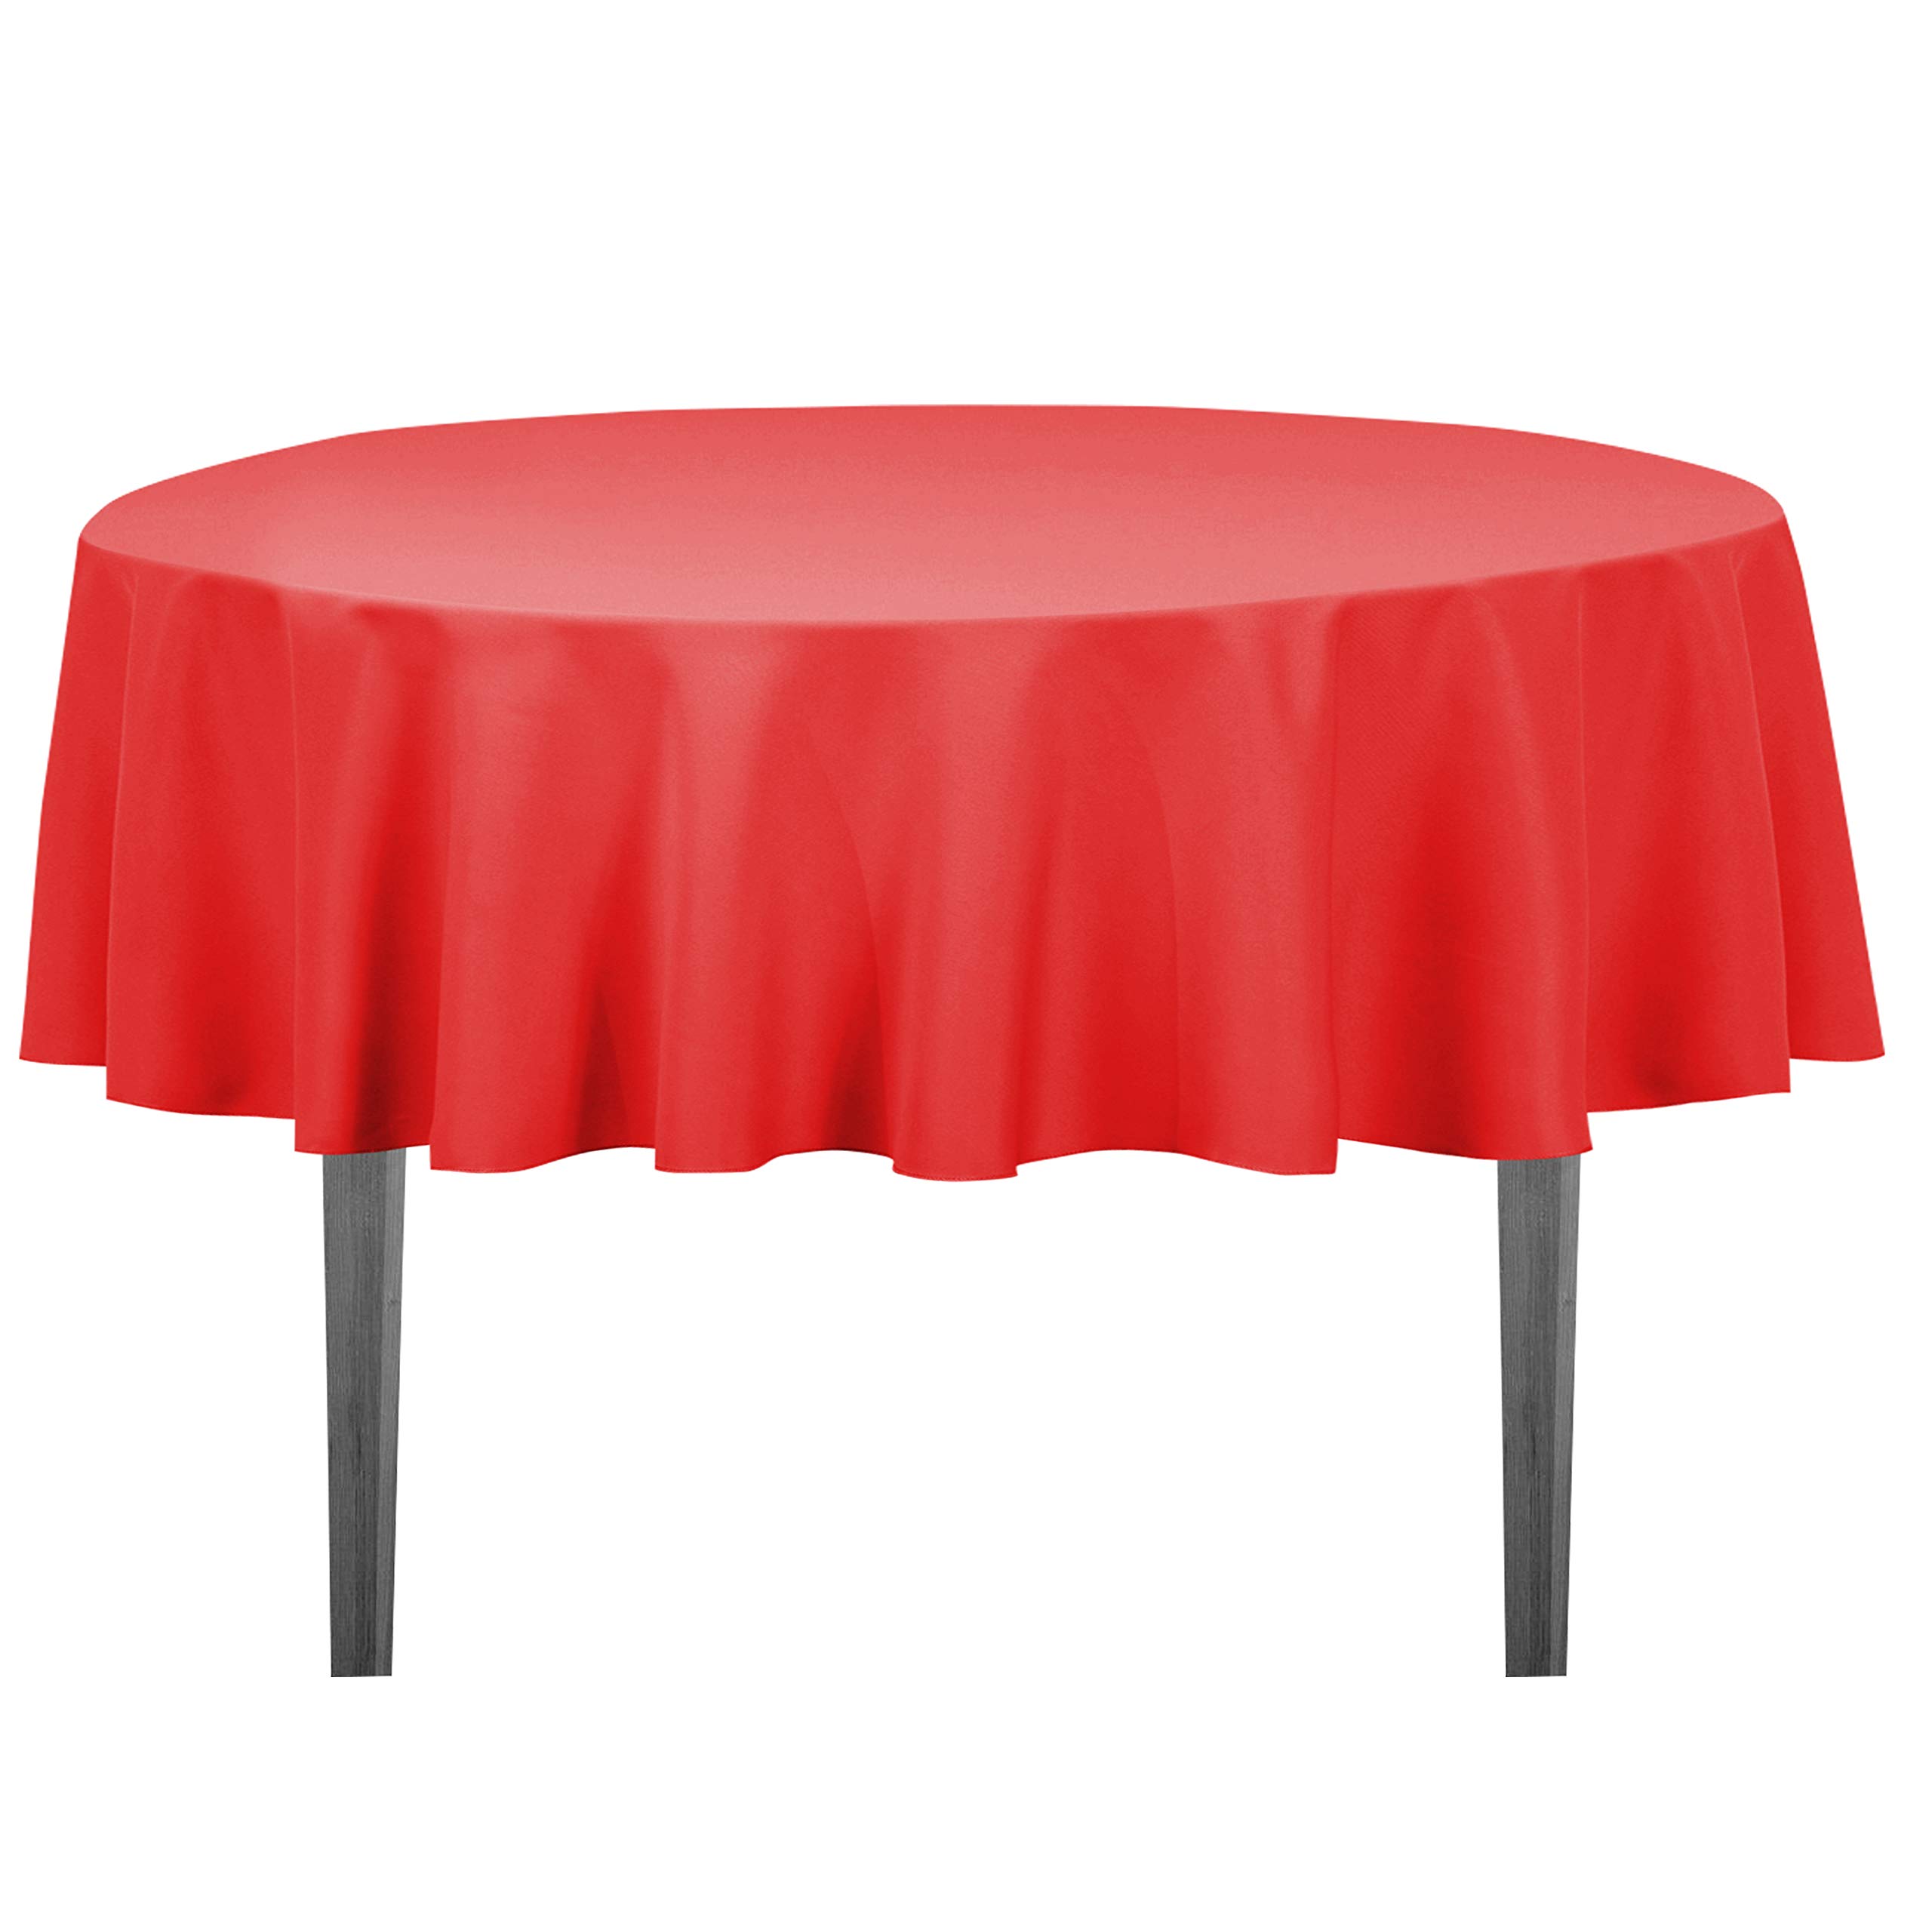 LTC LINENS LinenTablecloth 70-Inch Round Polyester Tablecloth Red